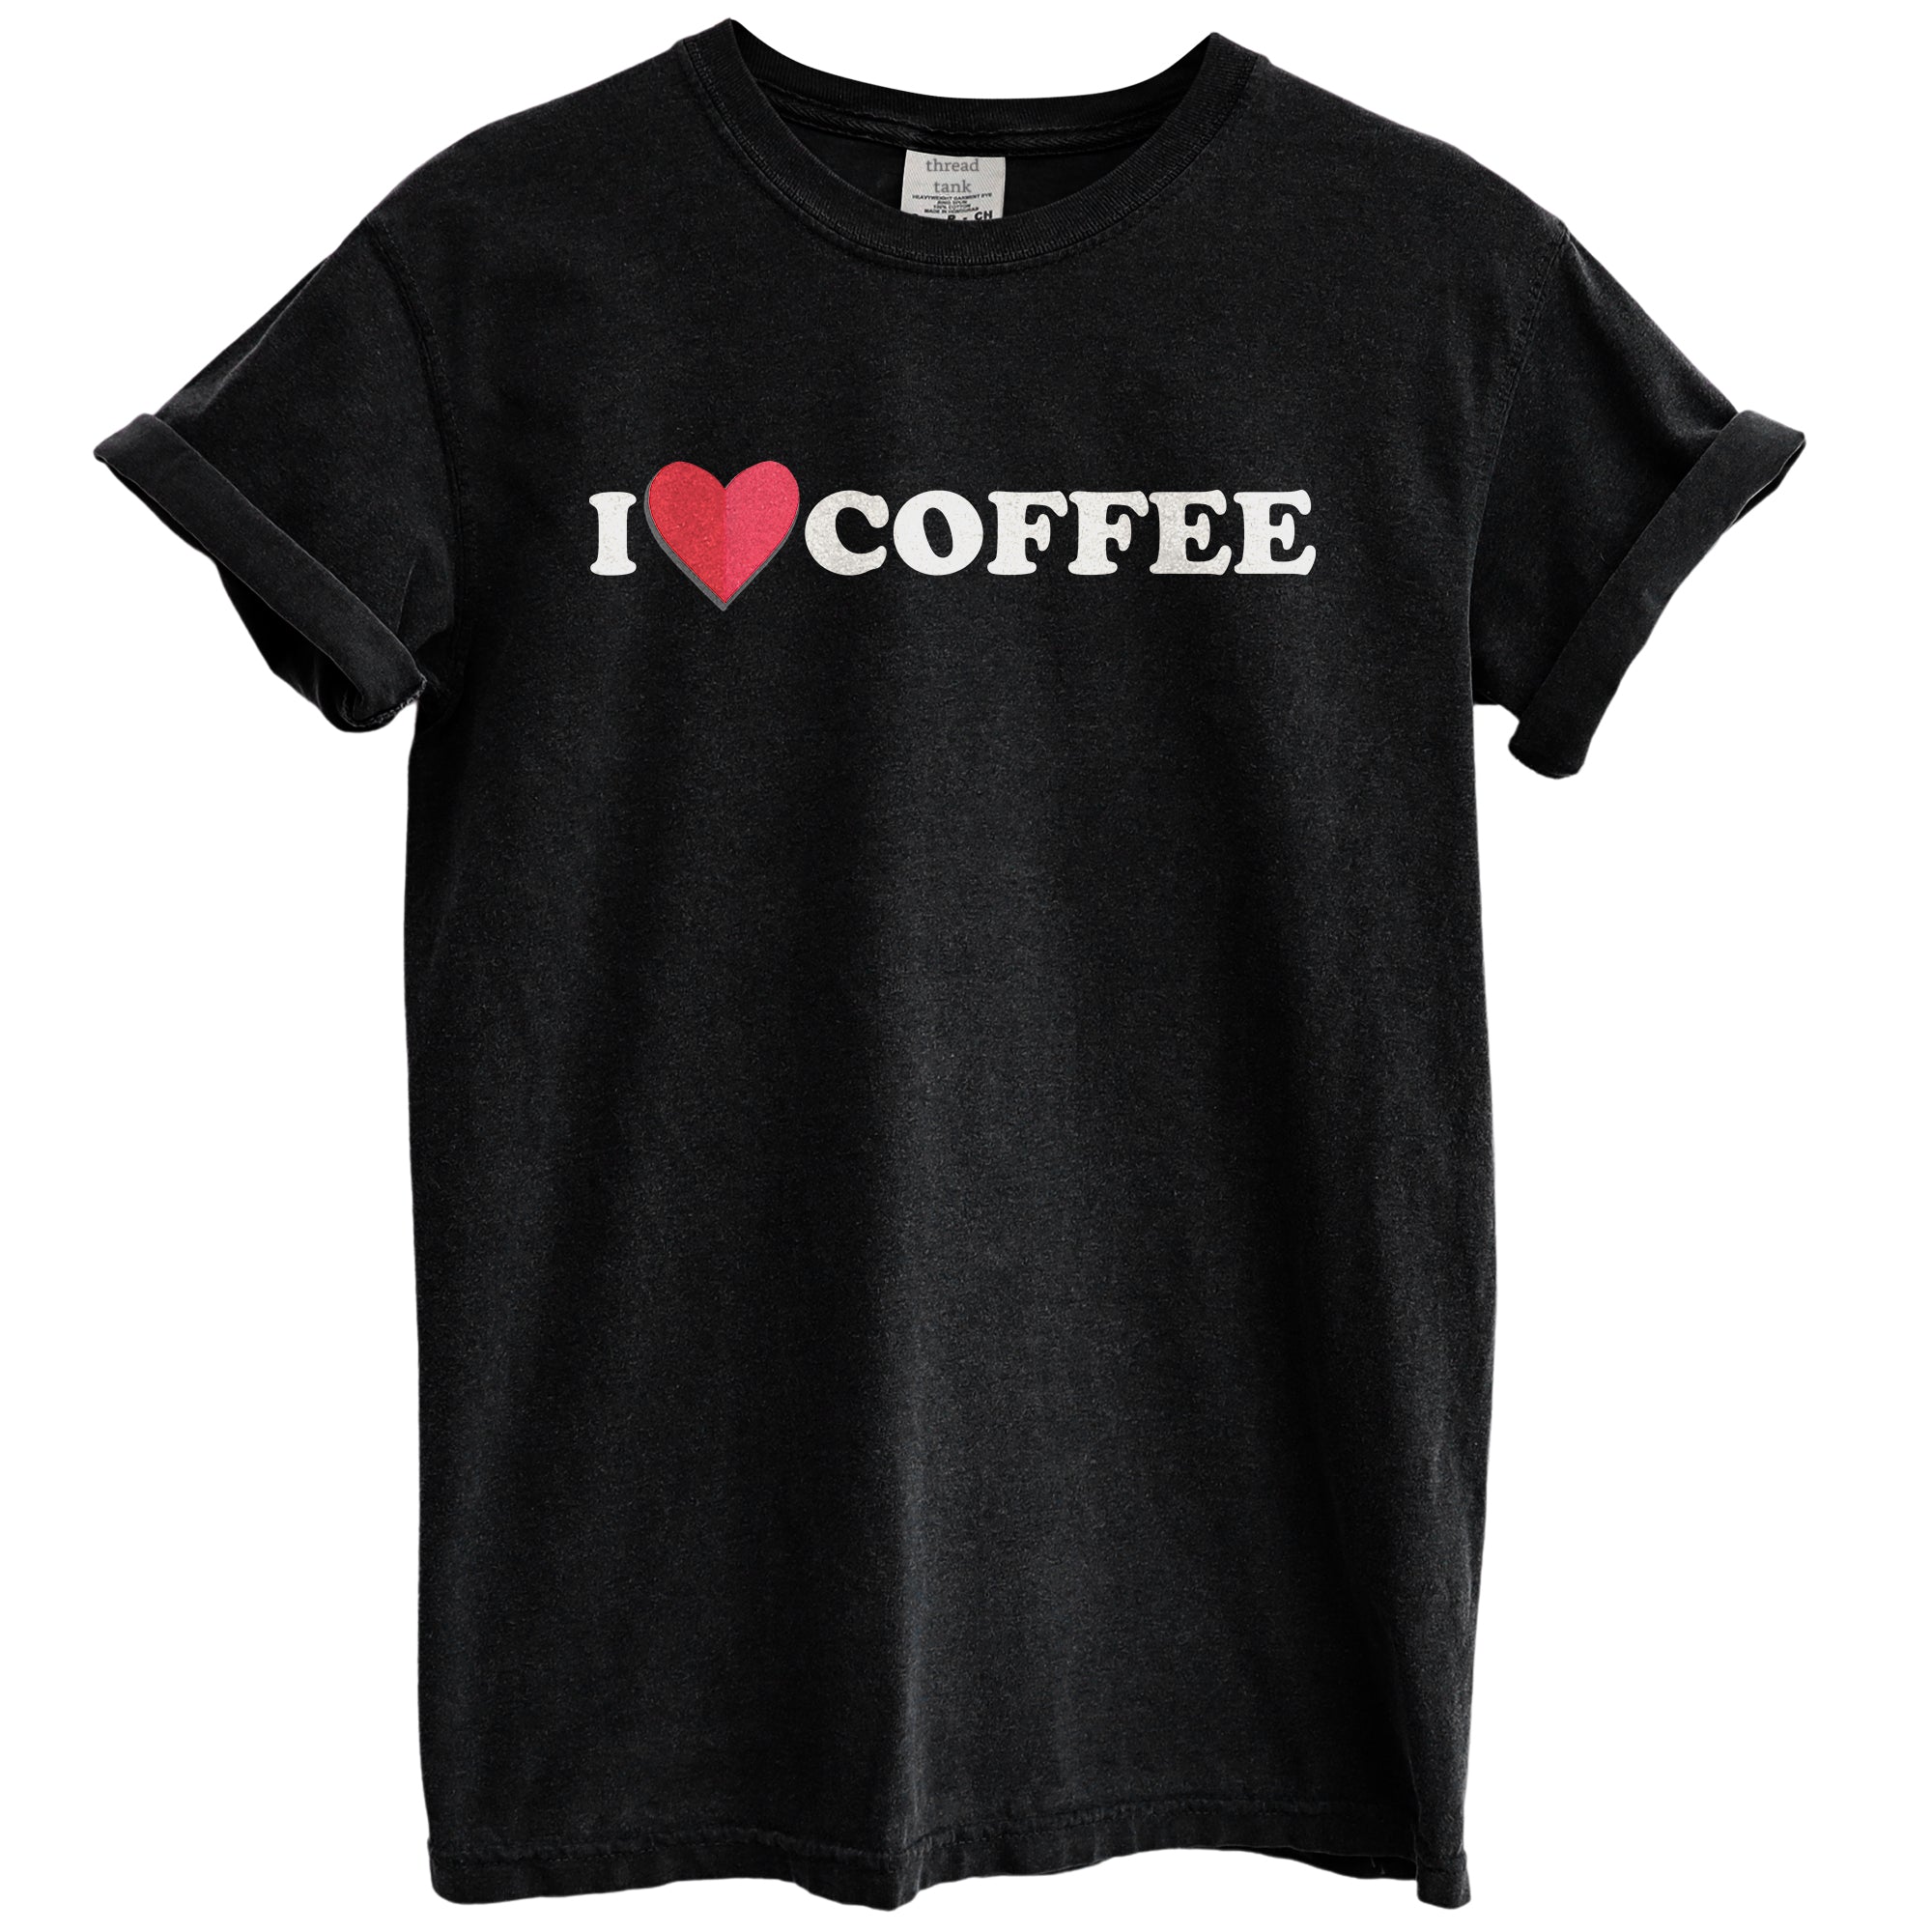 I Heart Coffee Garment-Dyed Tee - Stories You Can Wear